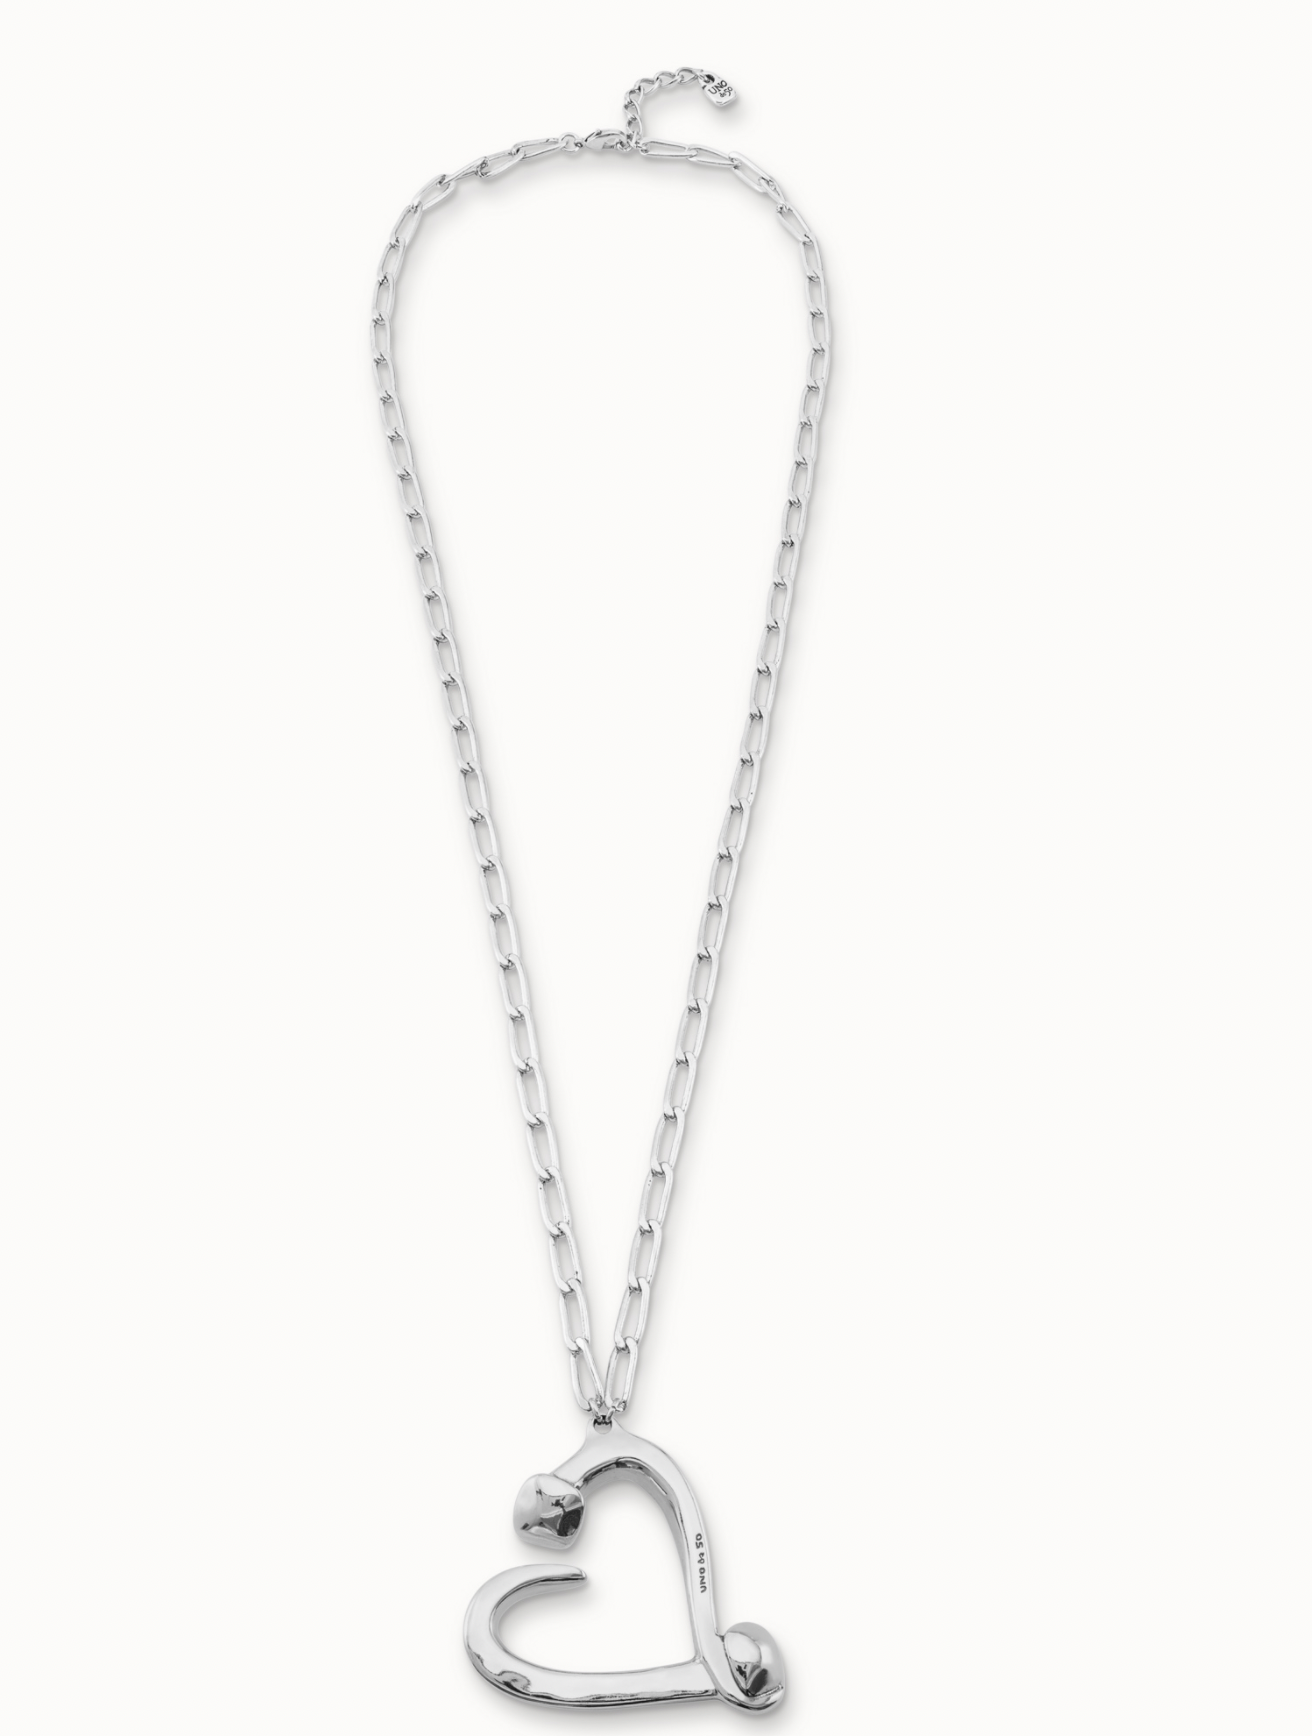 Matching Heart Necklace, Silver